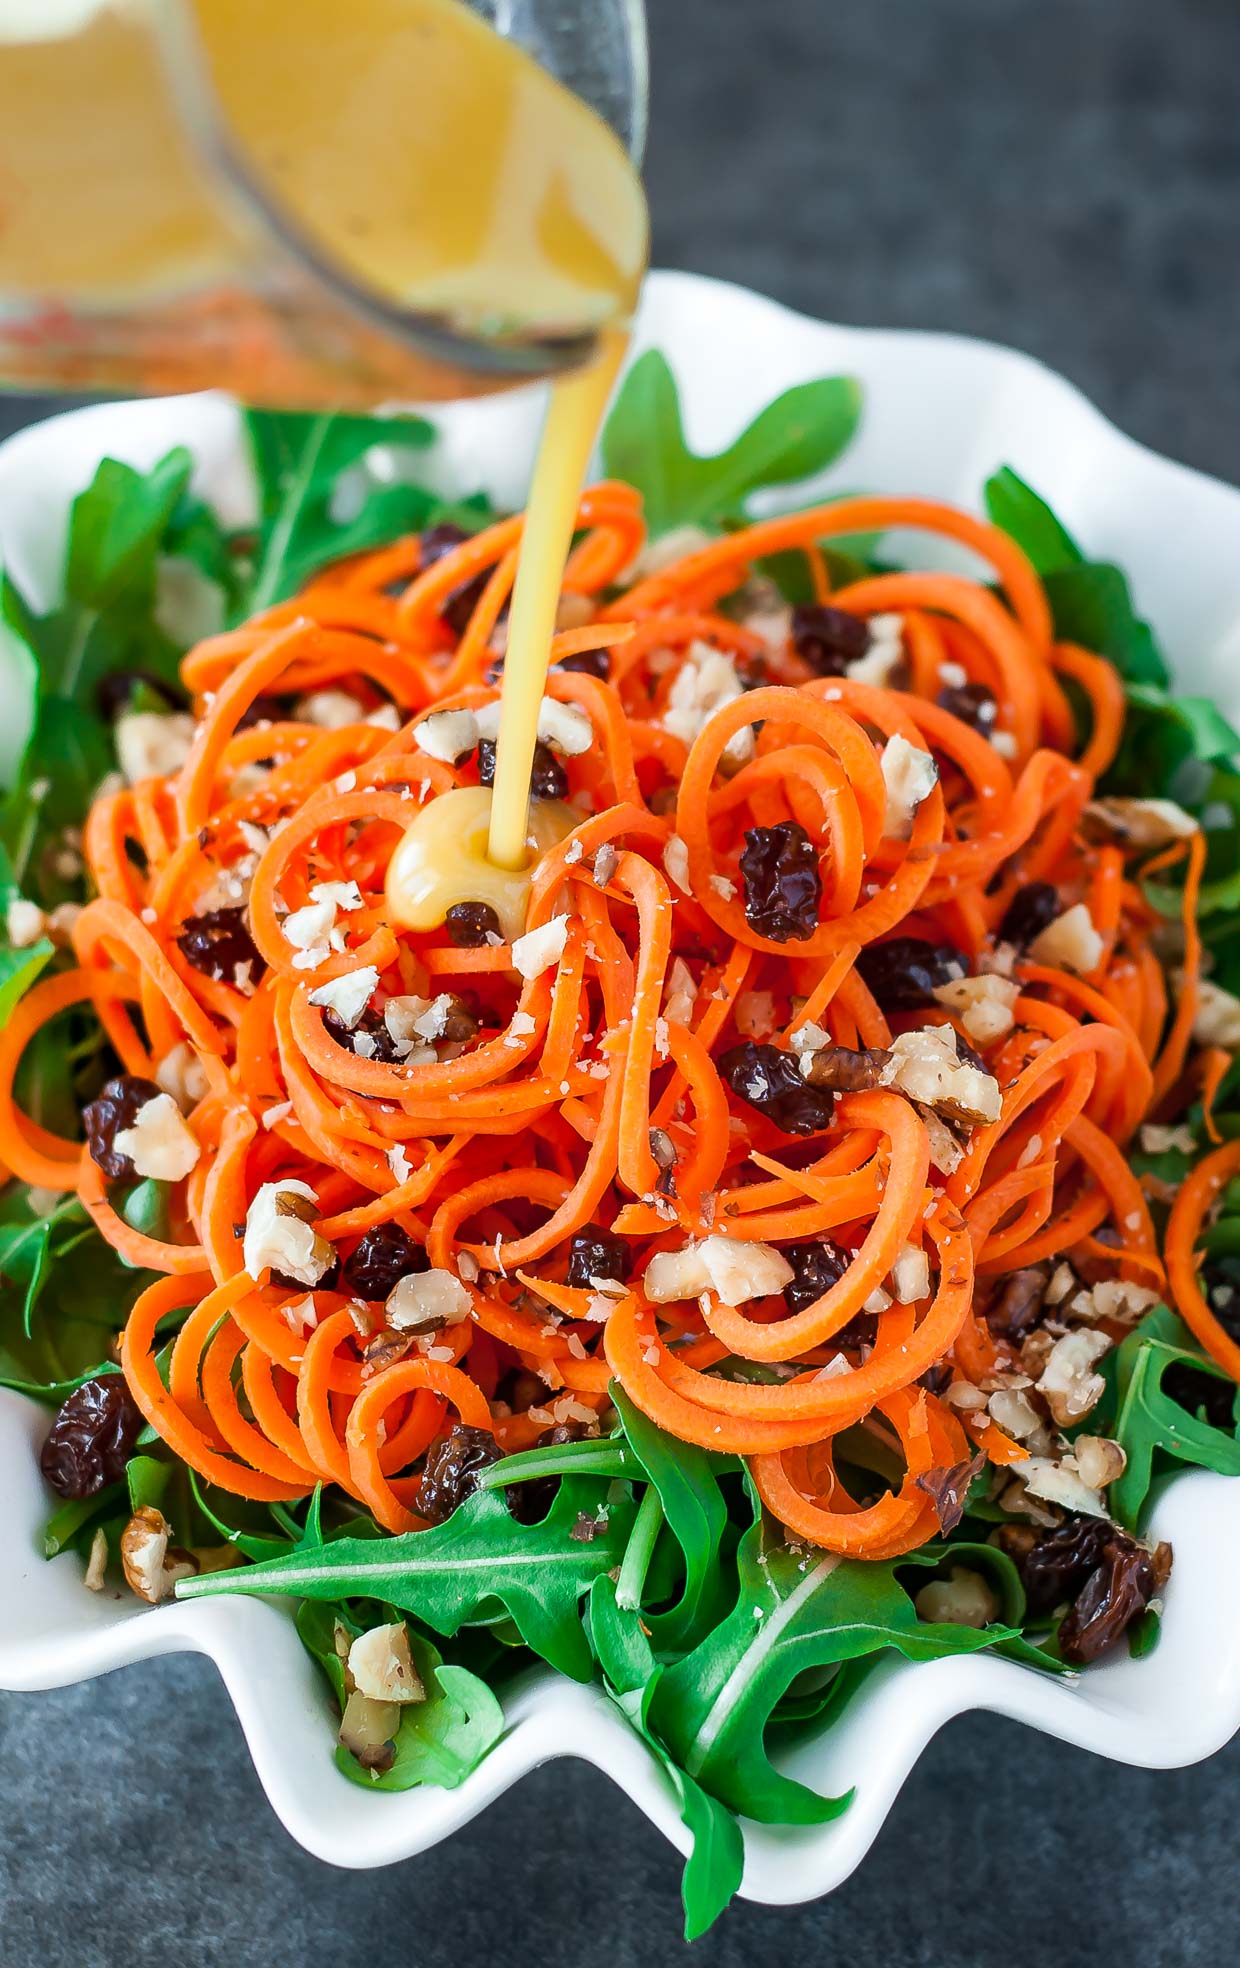 If you get a chance to try this healthy carrot salad, let me know! Leave some love in the comment form below or tag your photos with @peasandcrayons on Instagram so I can happy dance over your creation.